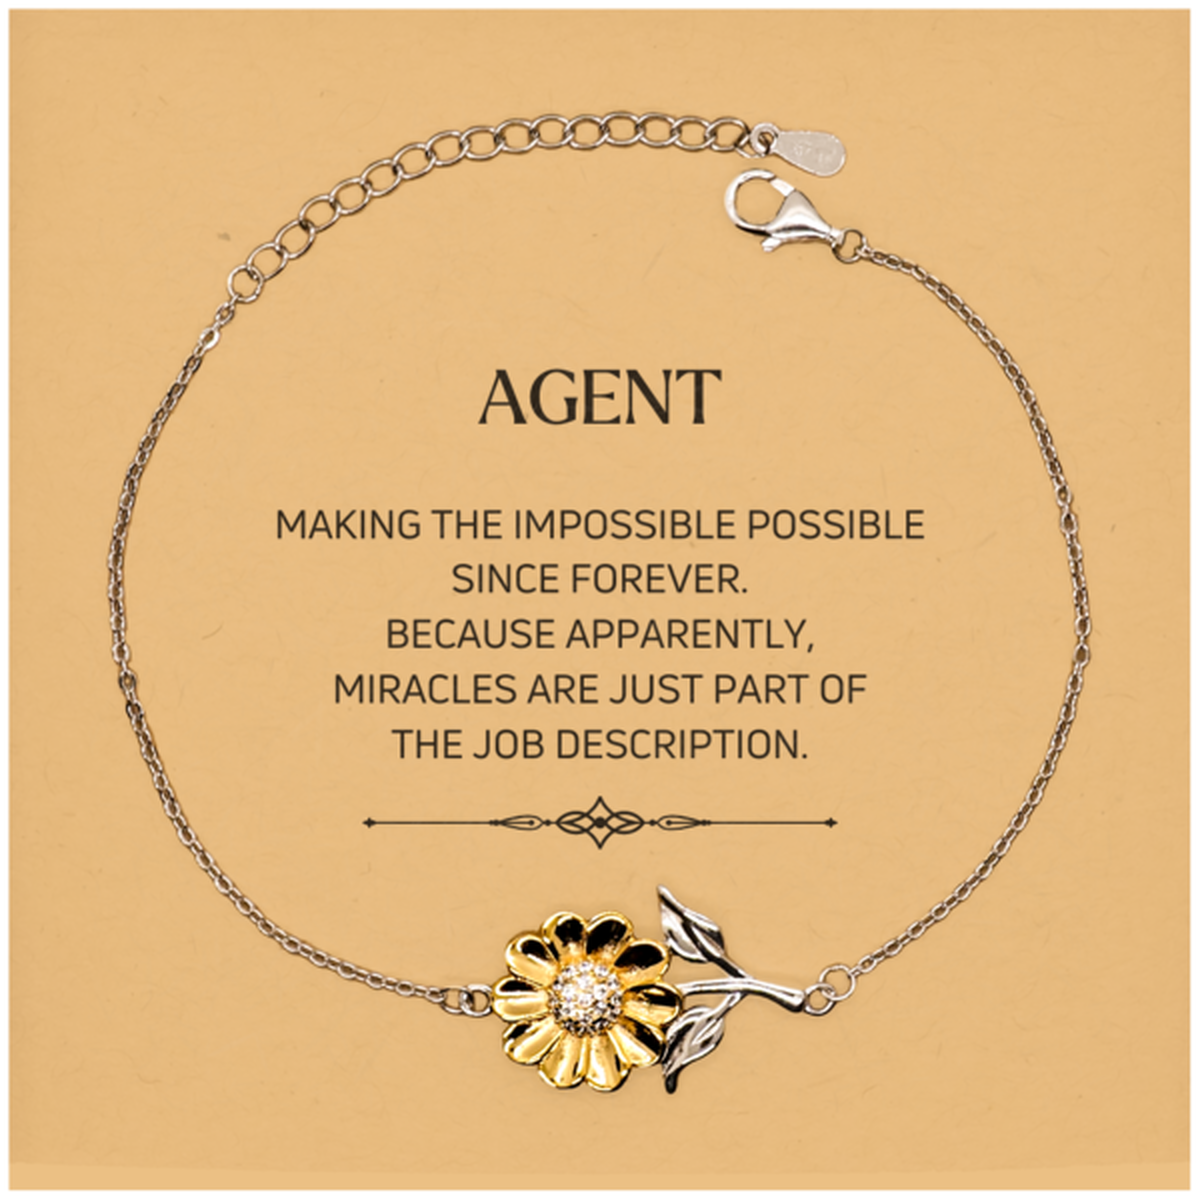 Funny Agent Gifts, Miracles are just part of the job description, Inspirational Birthday Christmas Sunflower Bracelet For Agent, Men, Women, Coworkers, Friends, Boss